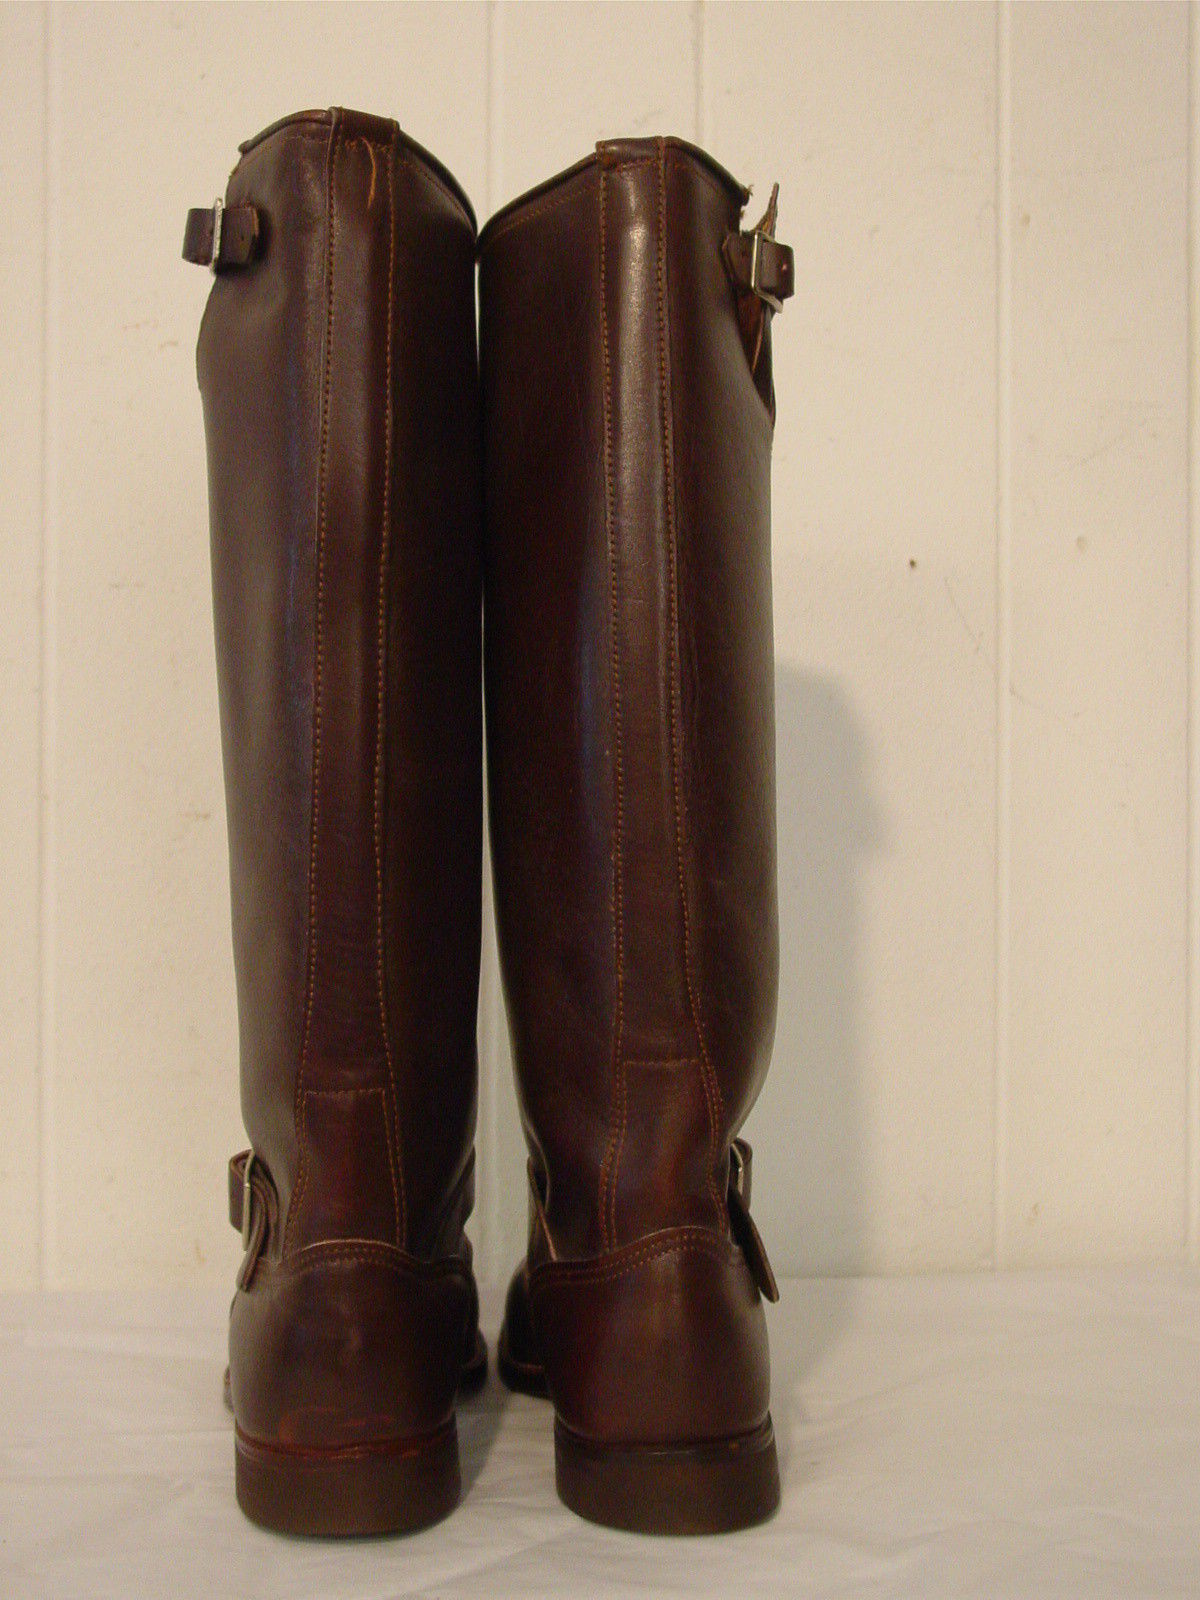 Vintage Engineer Boots: 1940'S CHIPPEWA ENGINEER BOOTS FOR THE LADIES